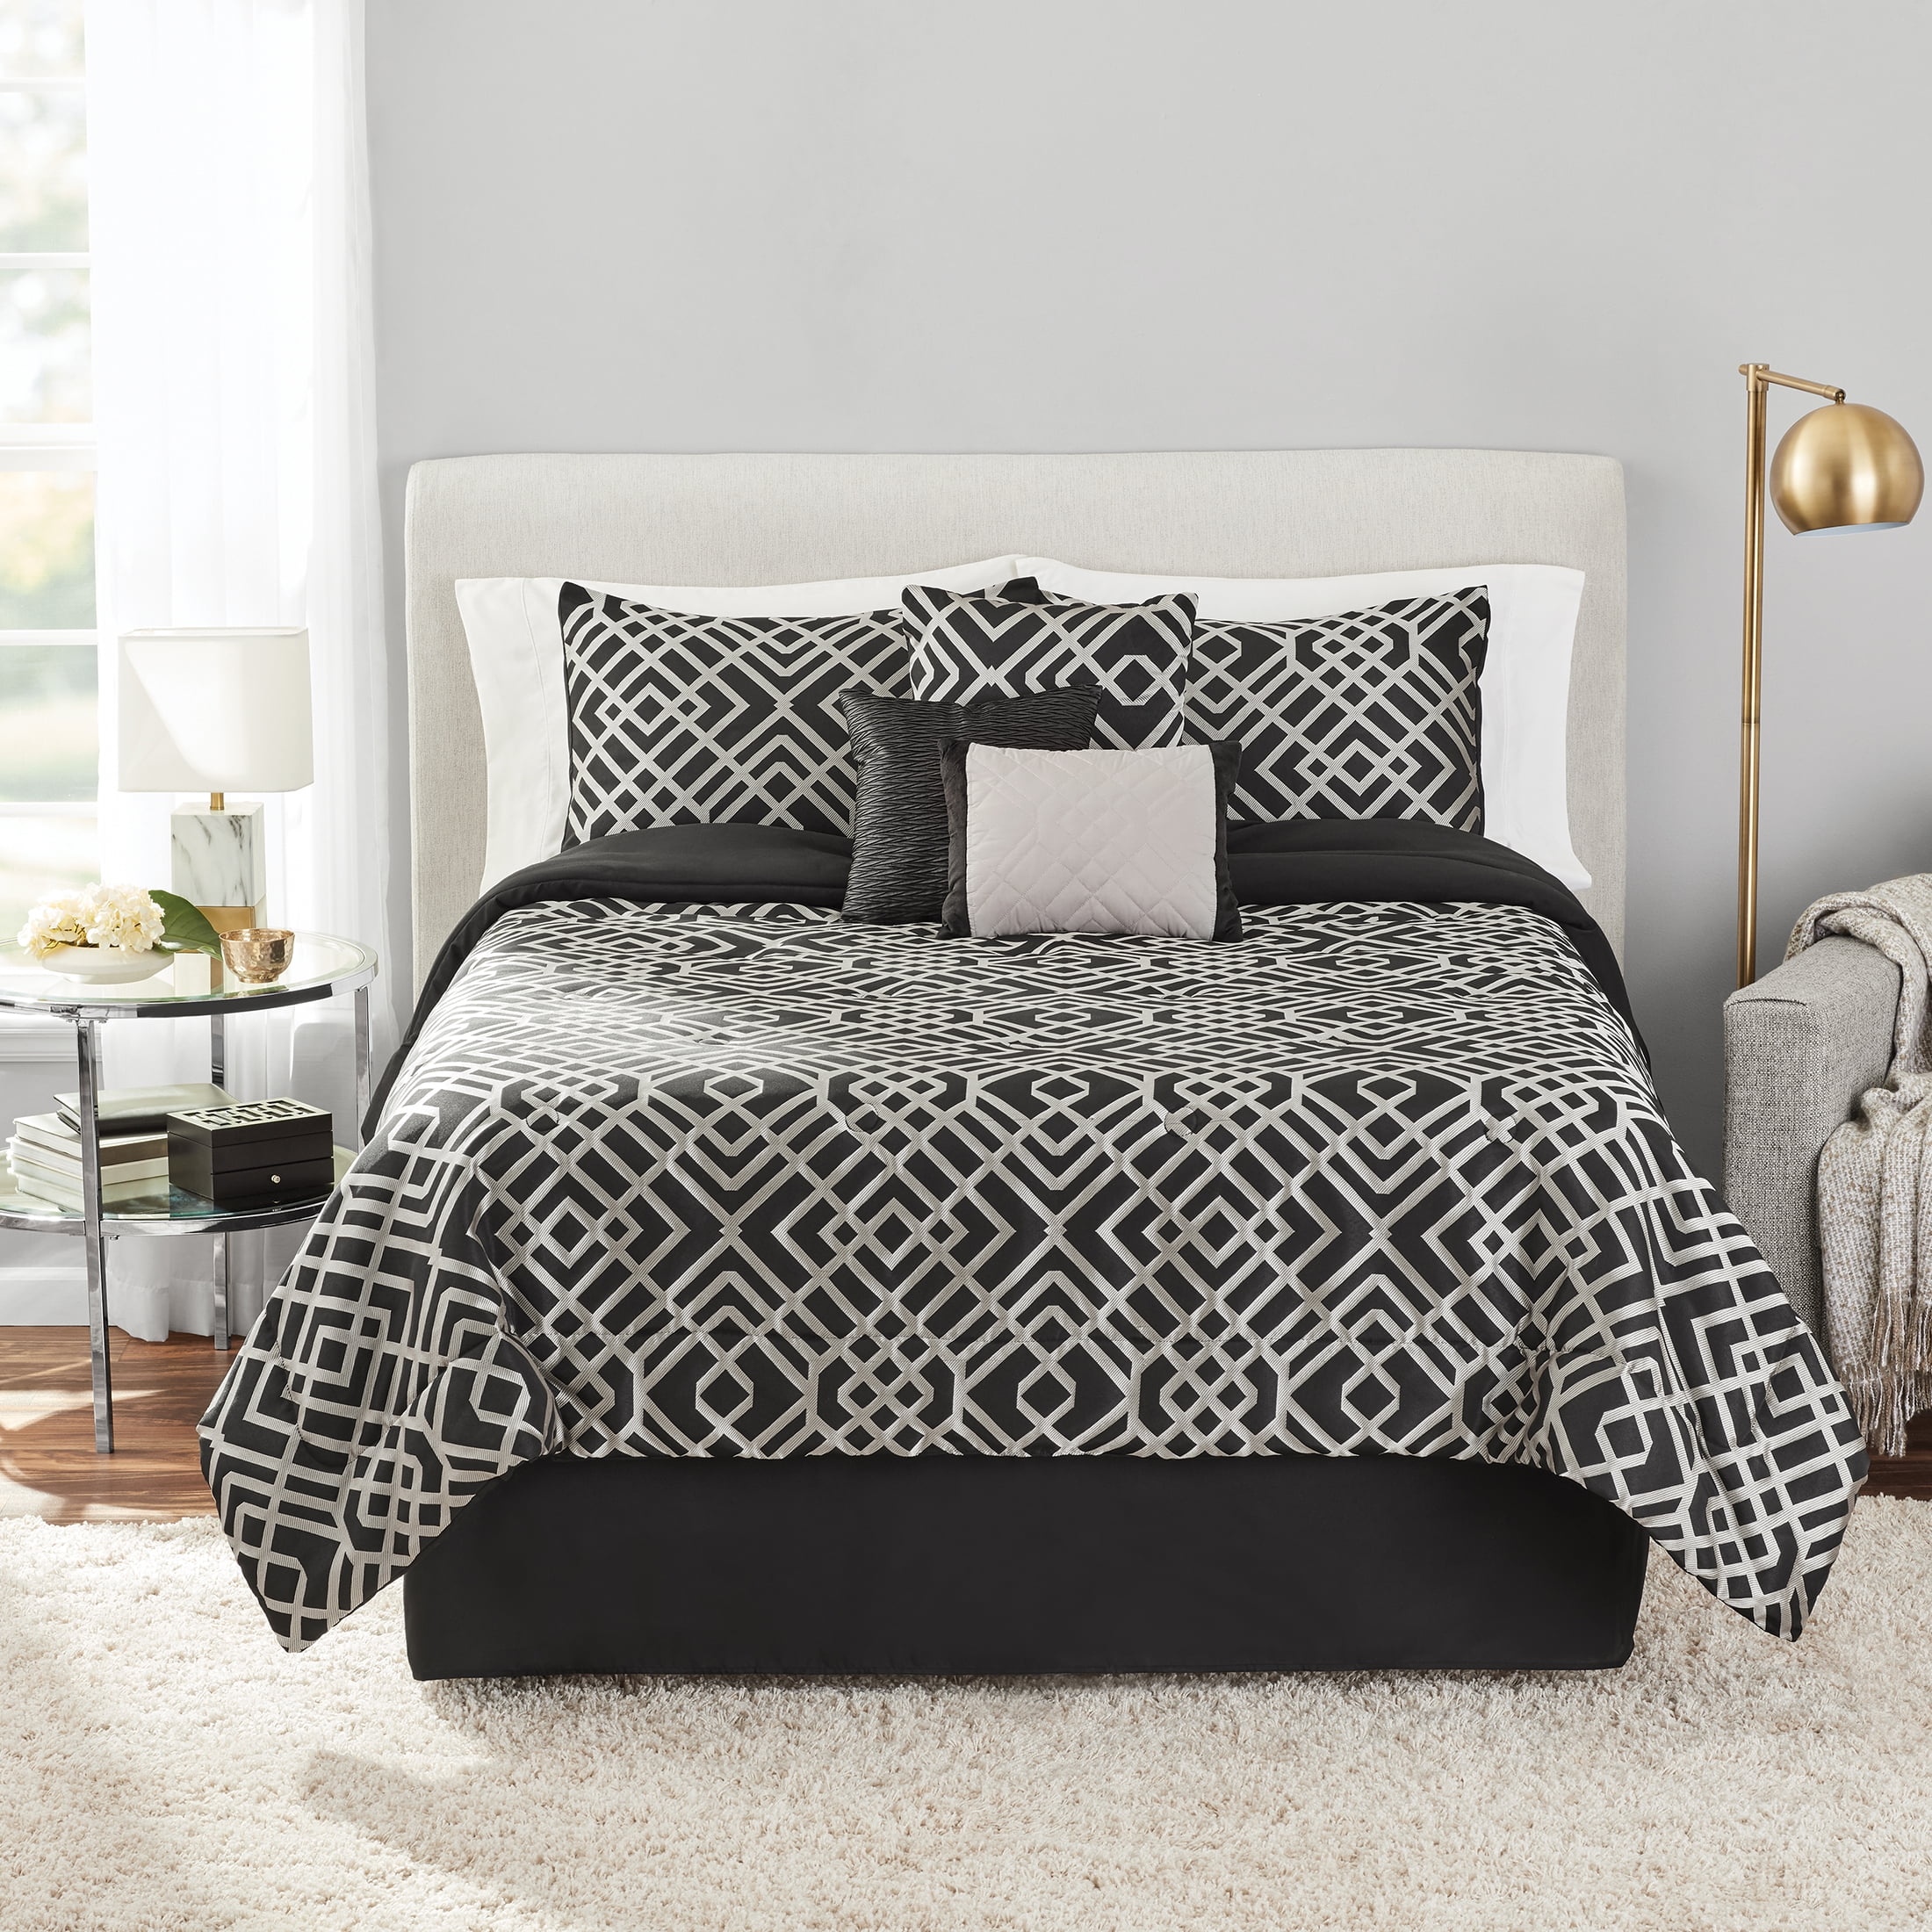 Cuddl Duds Gray  Plaid Flannel 4-Pc Full/Queen Comforter Set w/Faux Fur Pillow 